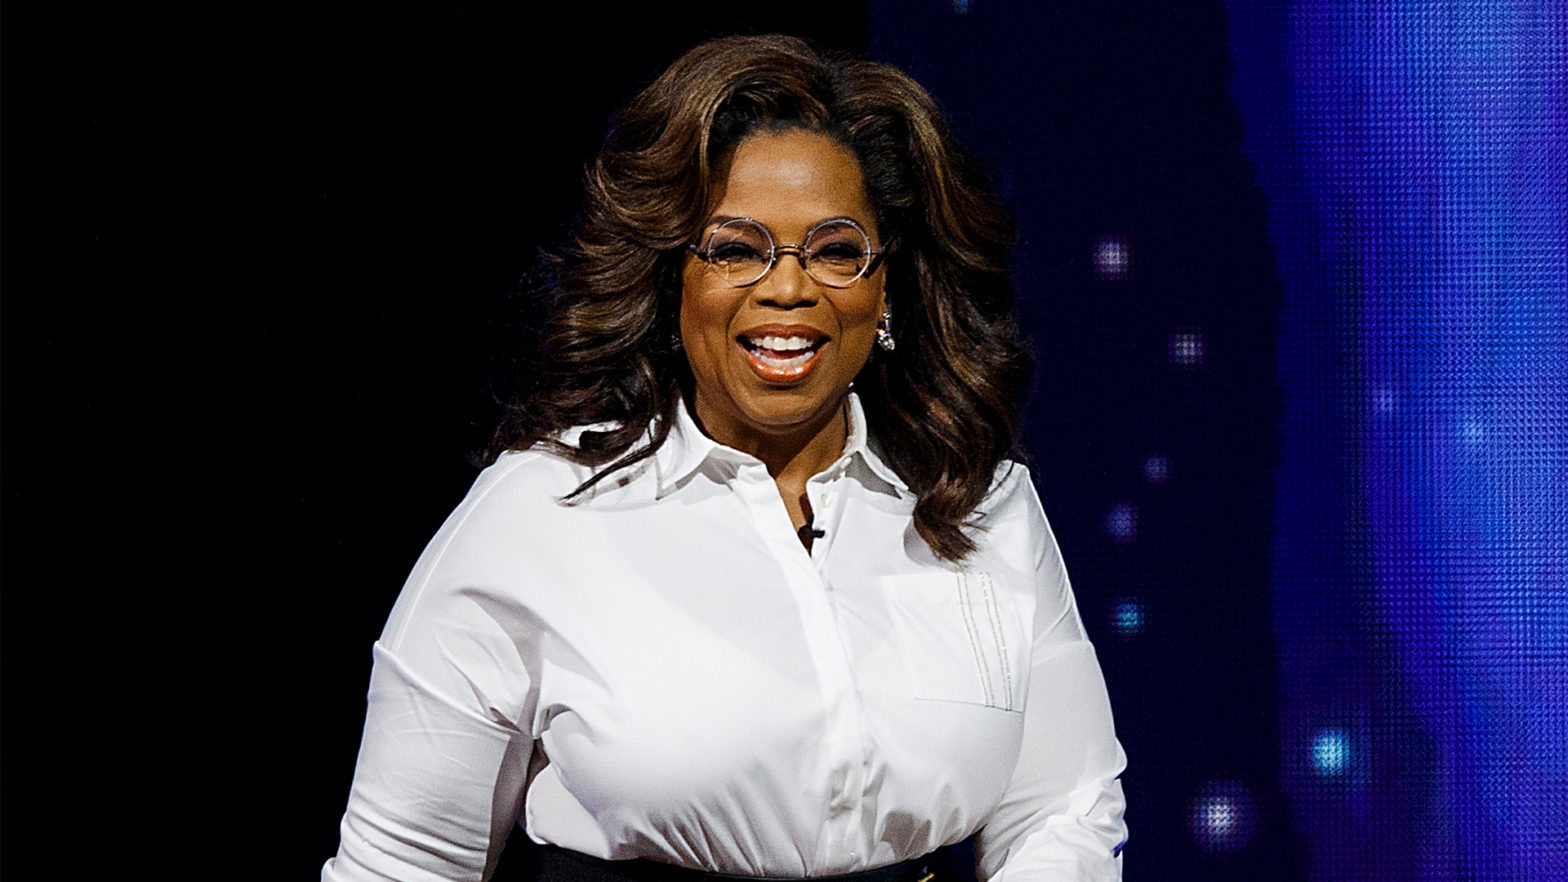 Oprahdemics: Oprah’s Harpo Sues Podcast Hosts For Attempting To Capitalize Off Of Her Name Without Authorization